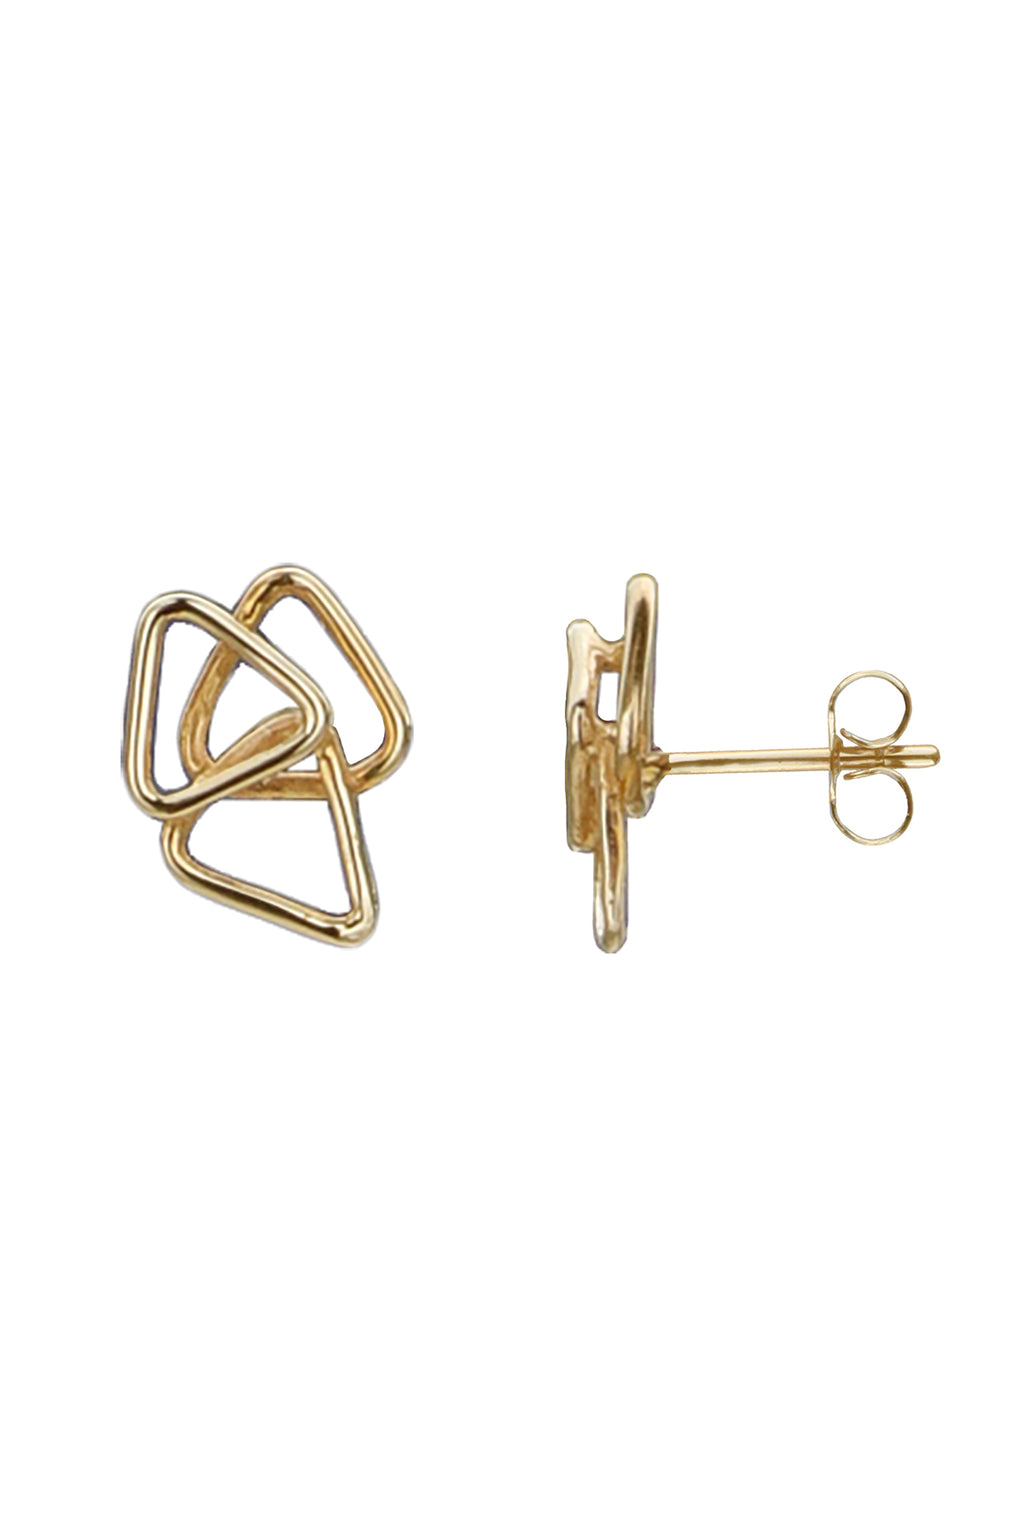 9ct Gold Earrings 3 Triangles